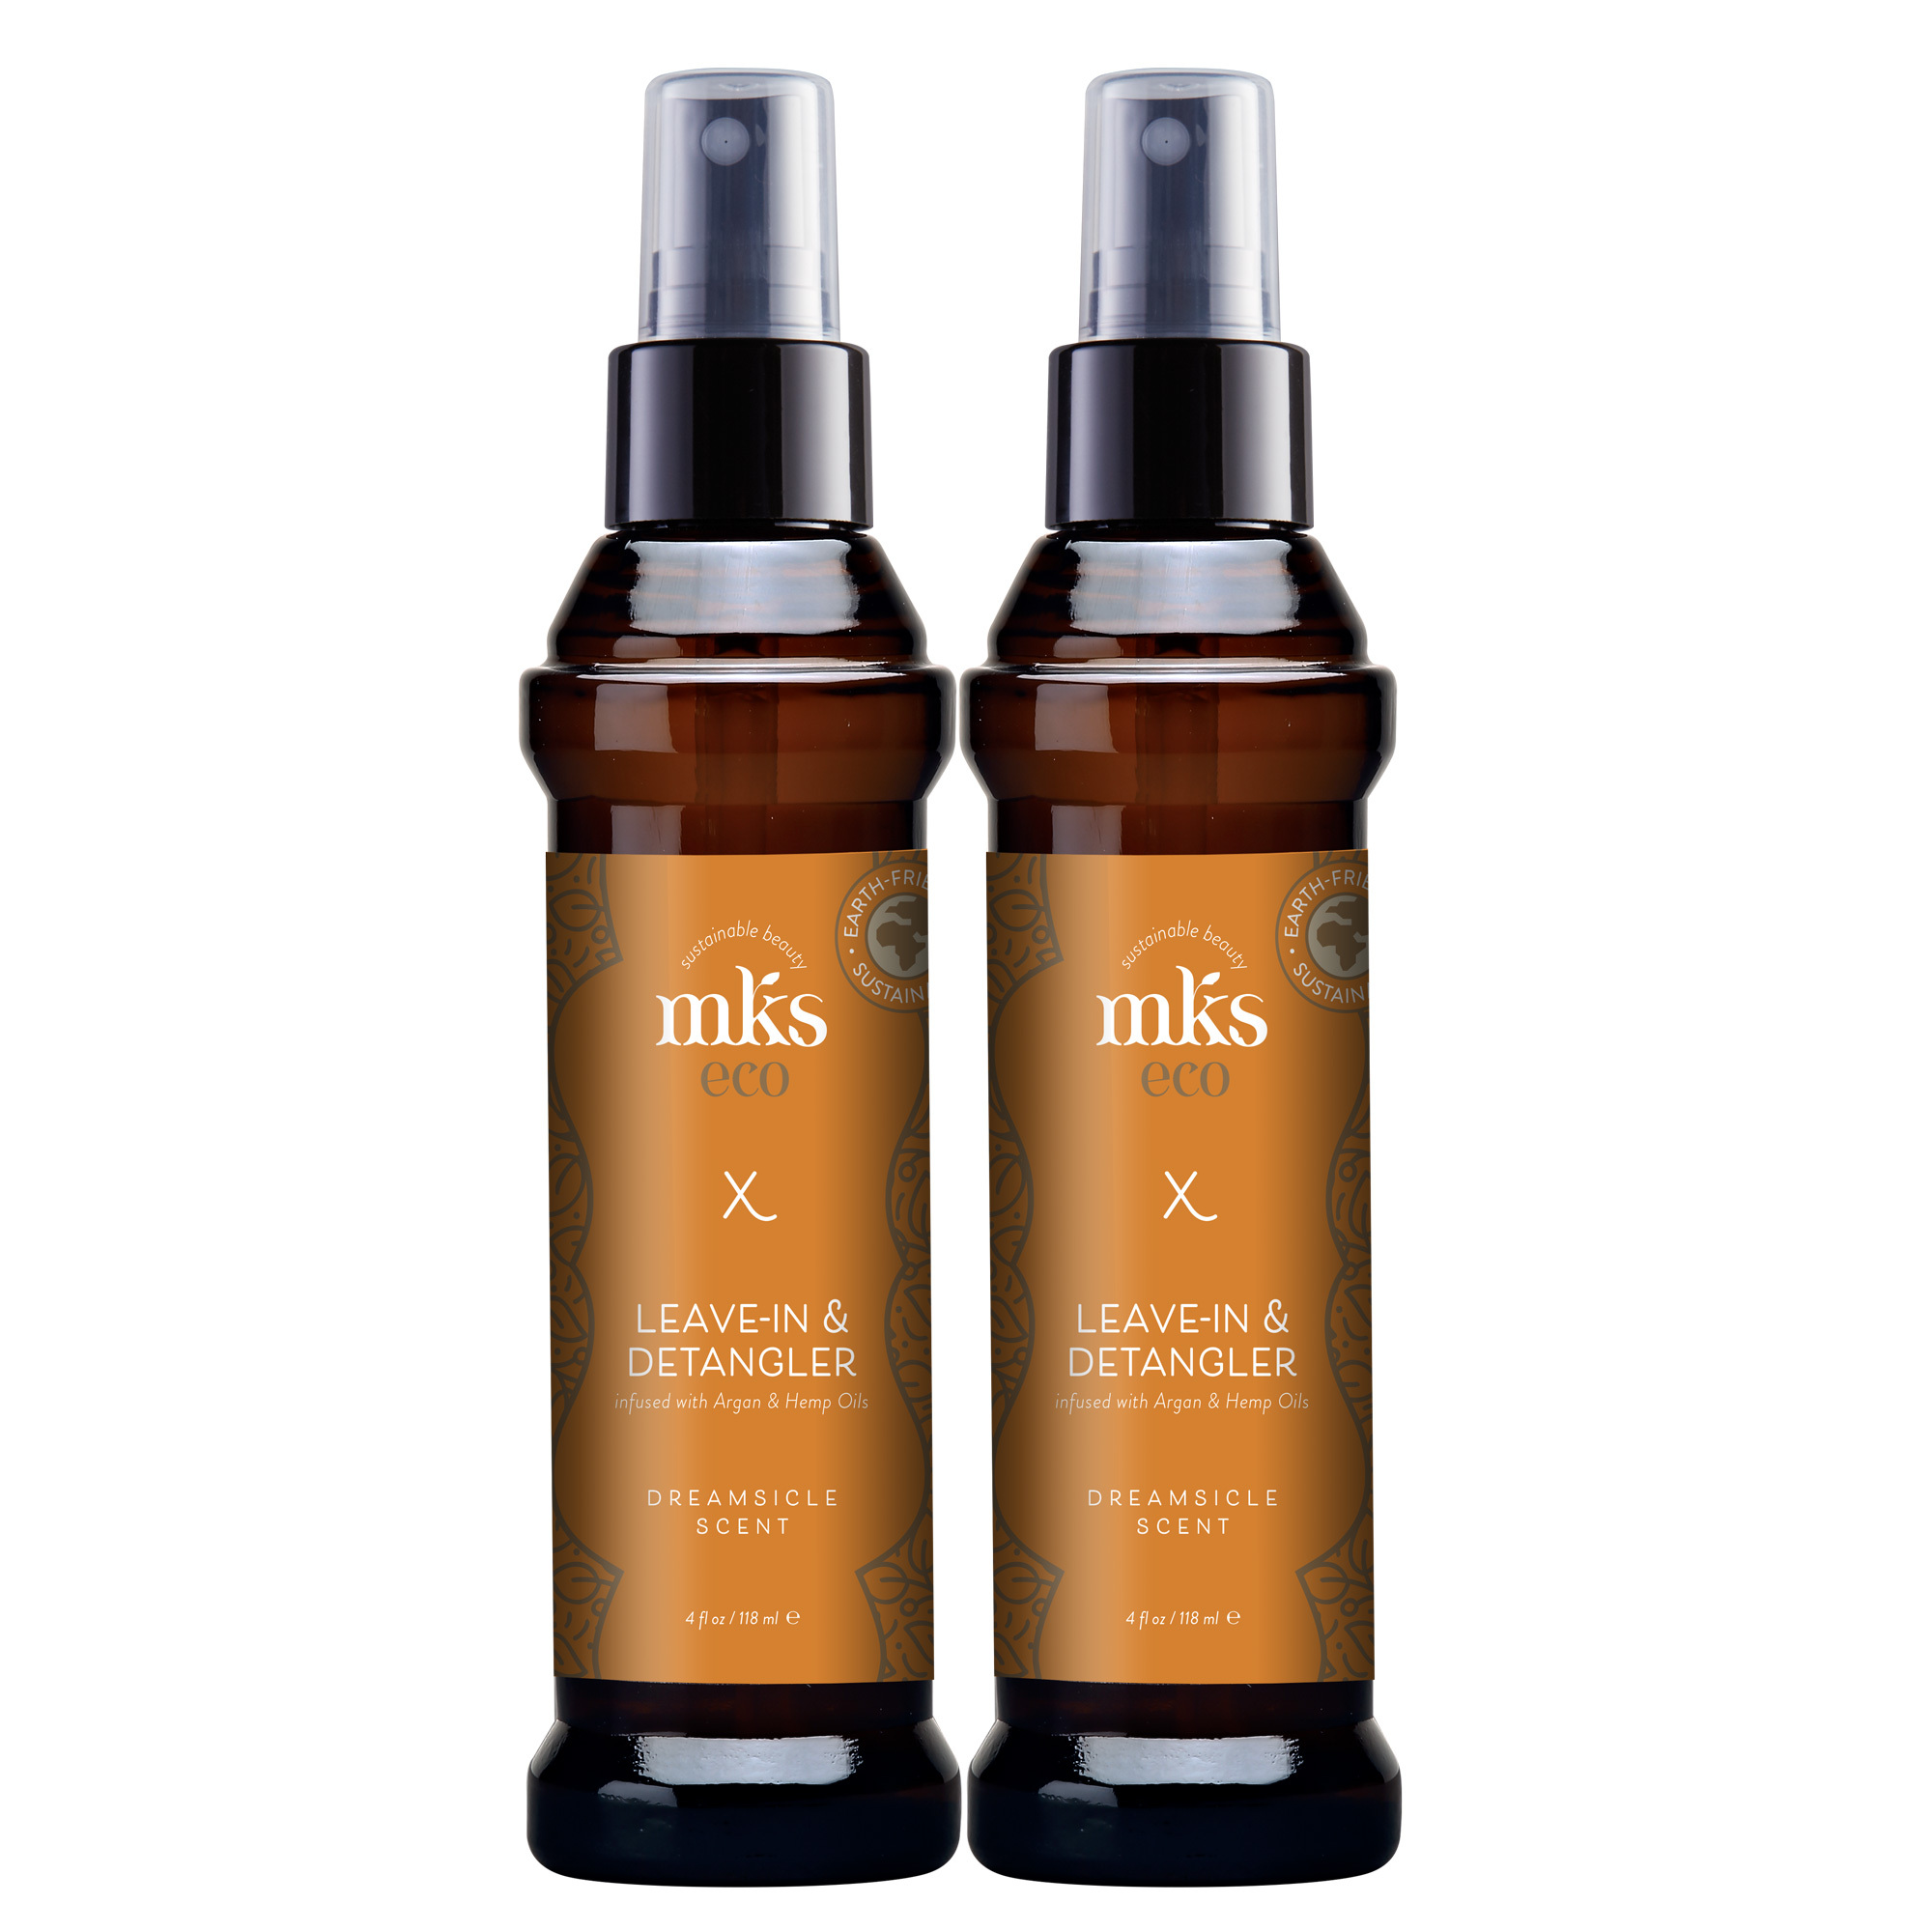 MKS eco DUOS: X Leave In & Detangler - Dreamsicle Scent